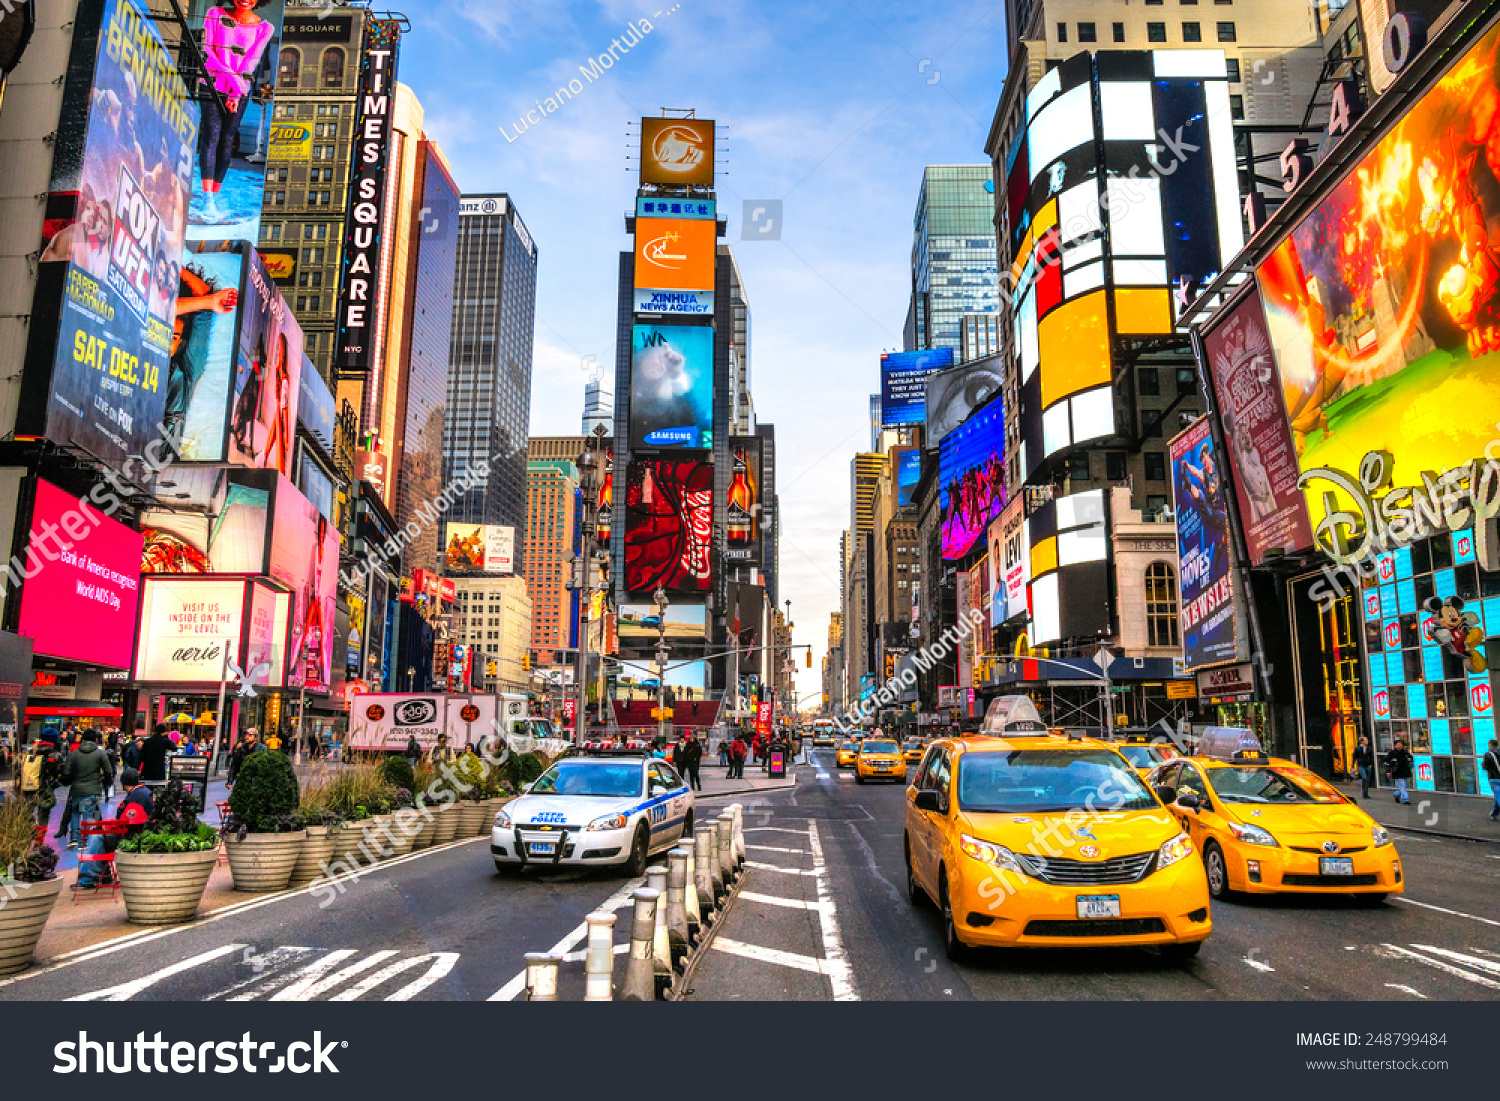 stock-photo-new-york-city-dec-times-square-is-a-busy-tourist-intersection-of-neon-art-and-commerce-and-is-248799484.jpg